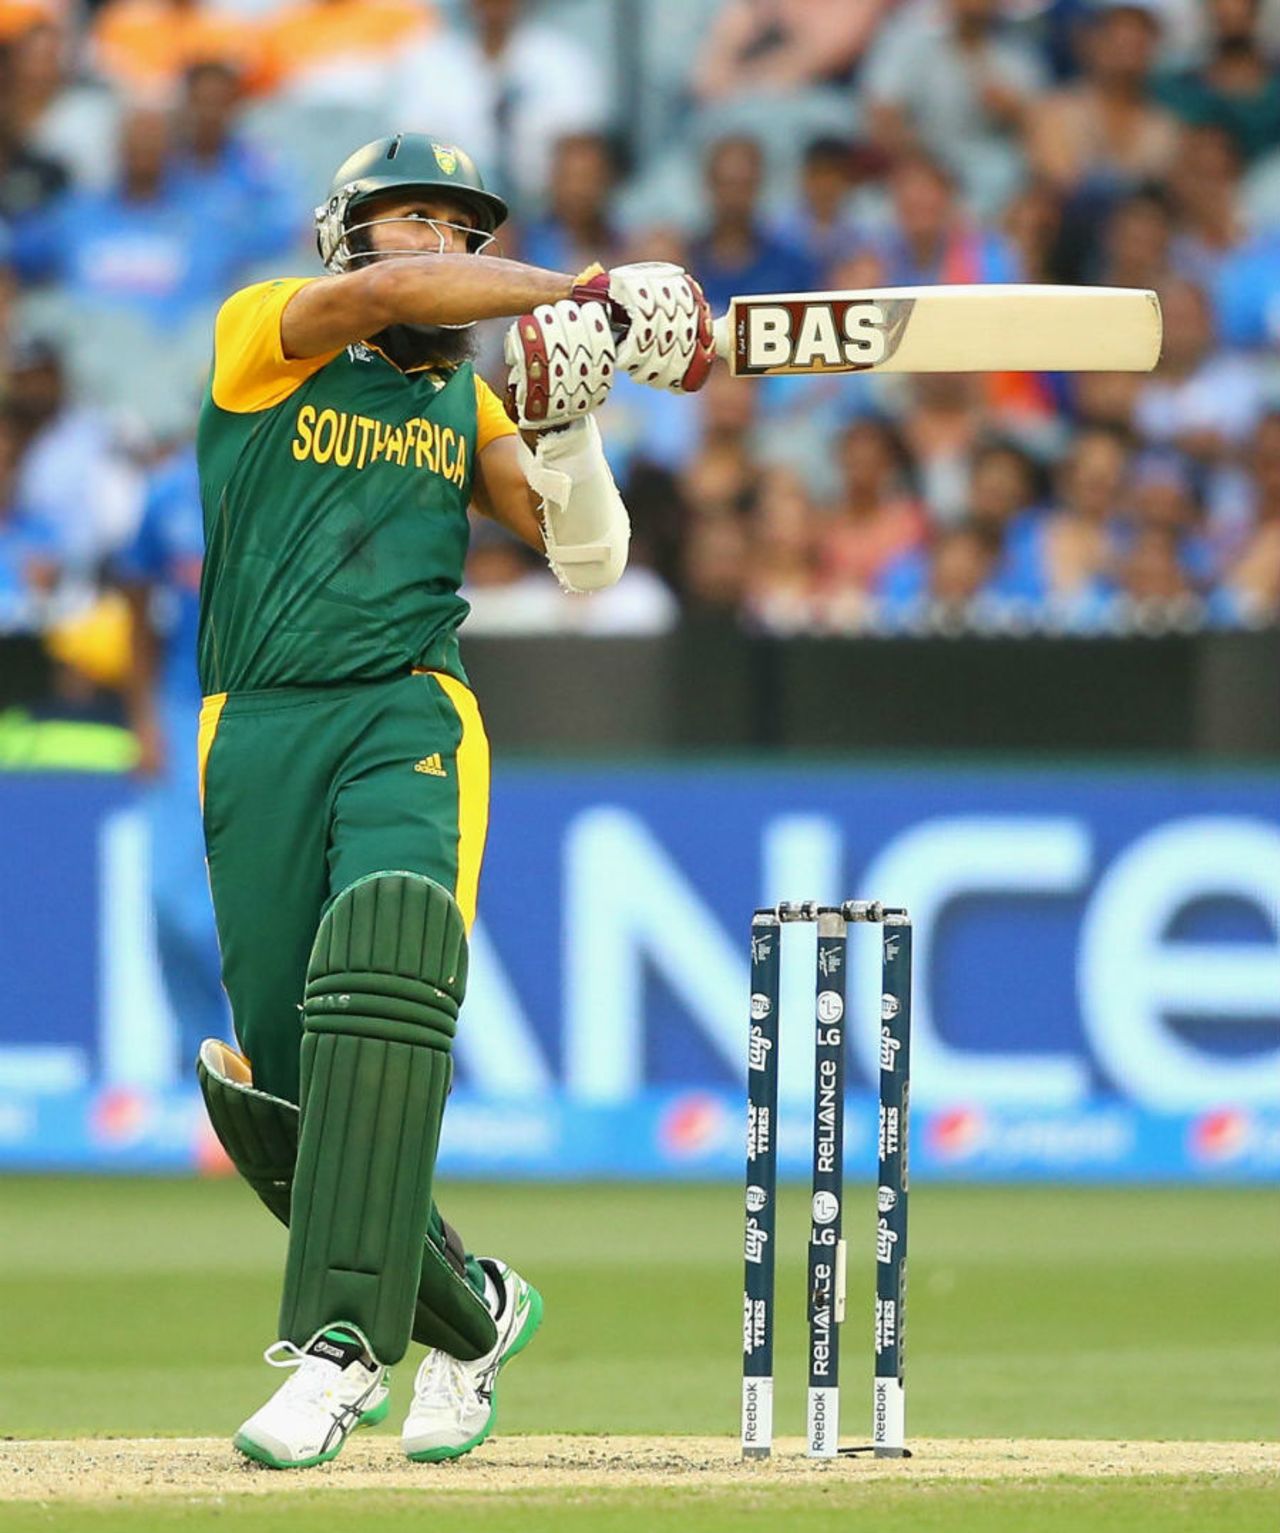 Hashim Amla plays a pull shot, India v South Africa, World Cup 2015, Group B, Melbourne, February 22, 2015